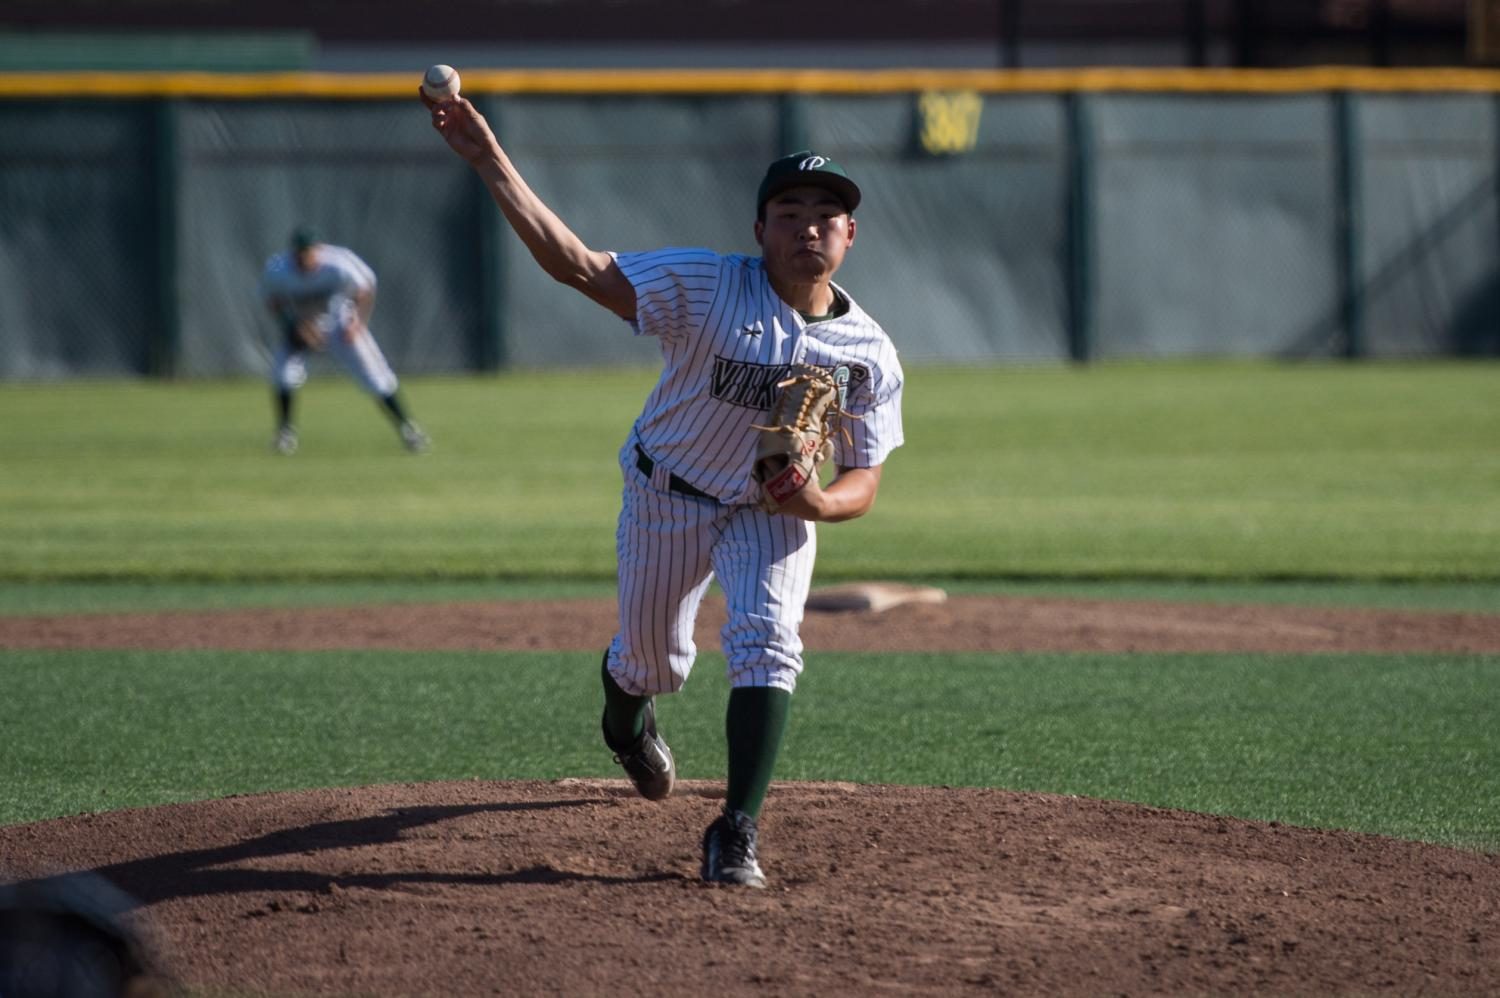 Baseball eliminated from CCS playoffs as Mitty upsets the Vikings 1-0 in an intense pitchers duel